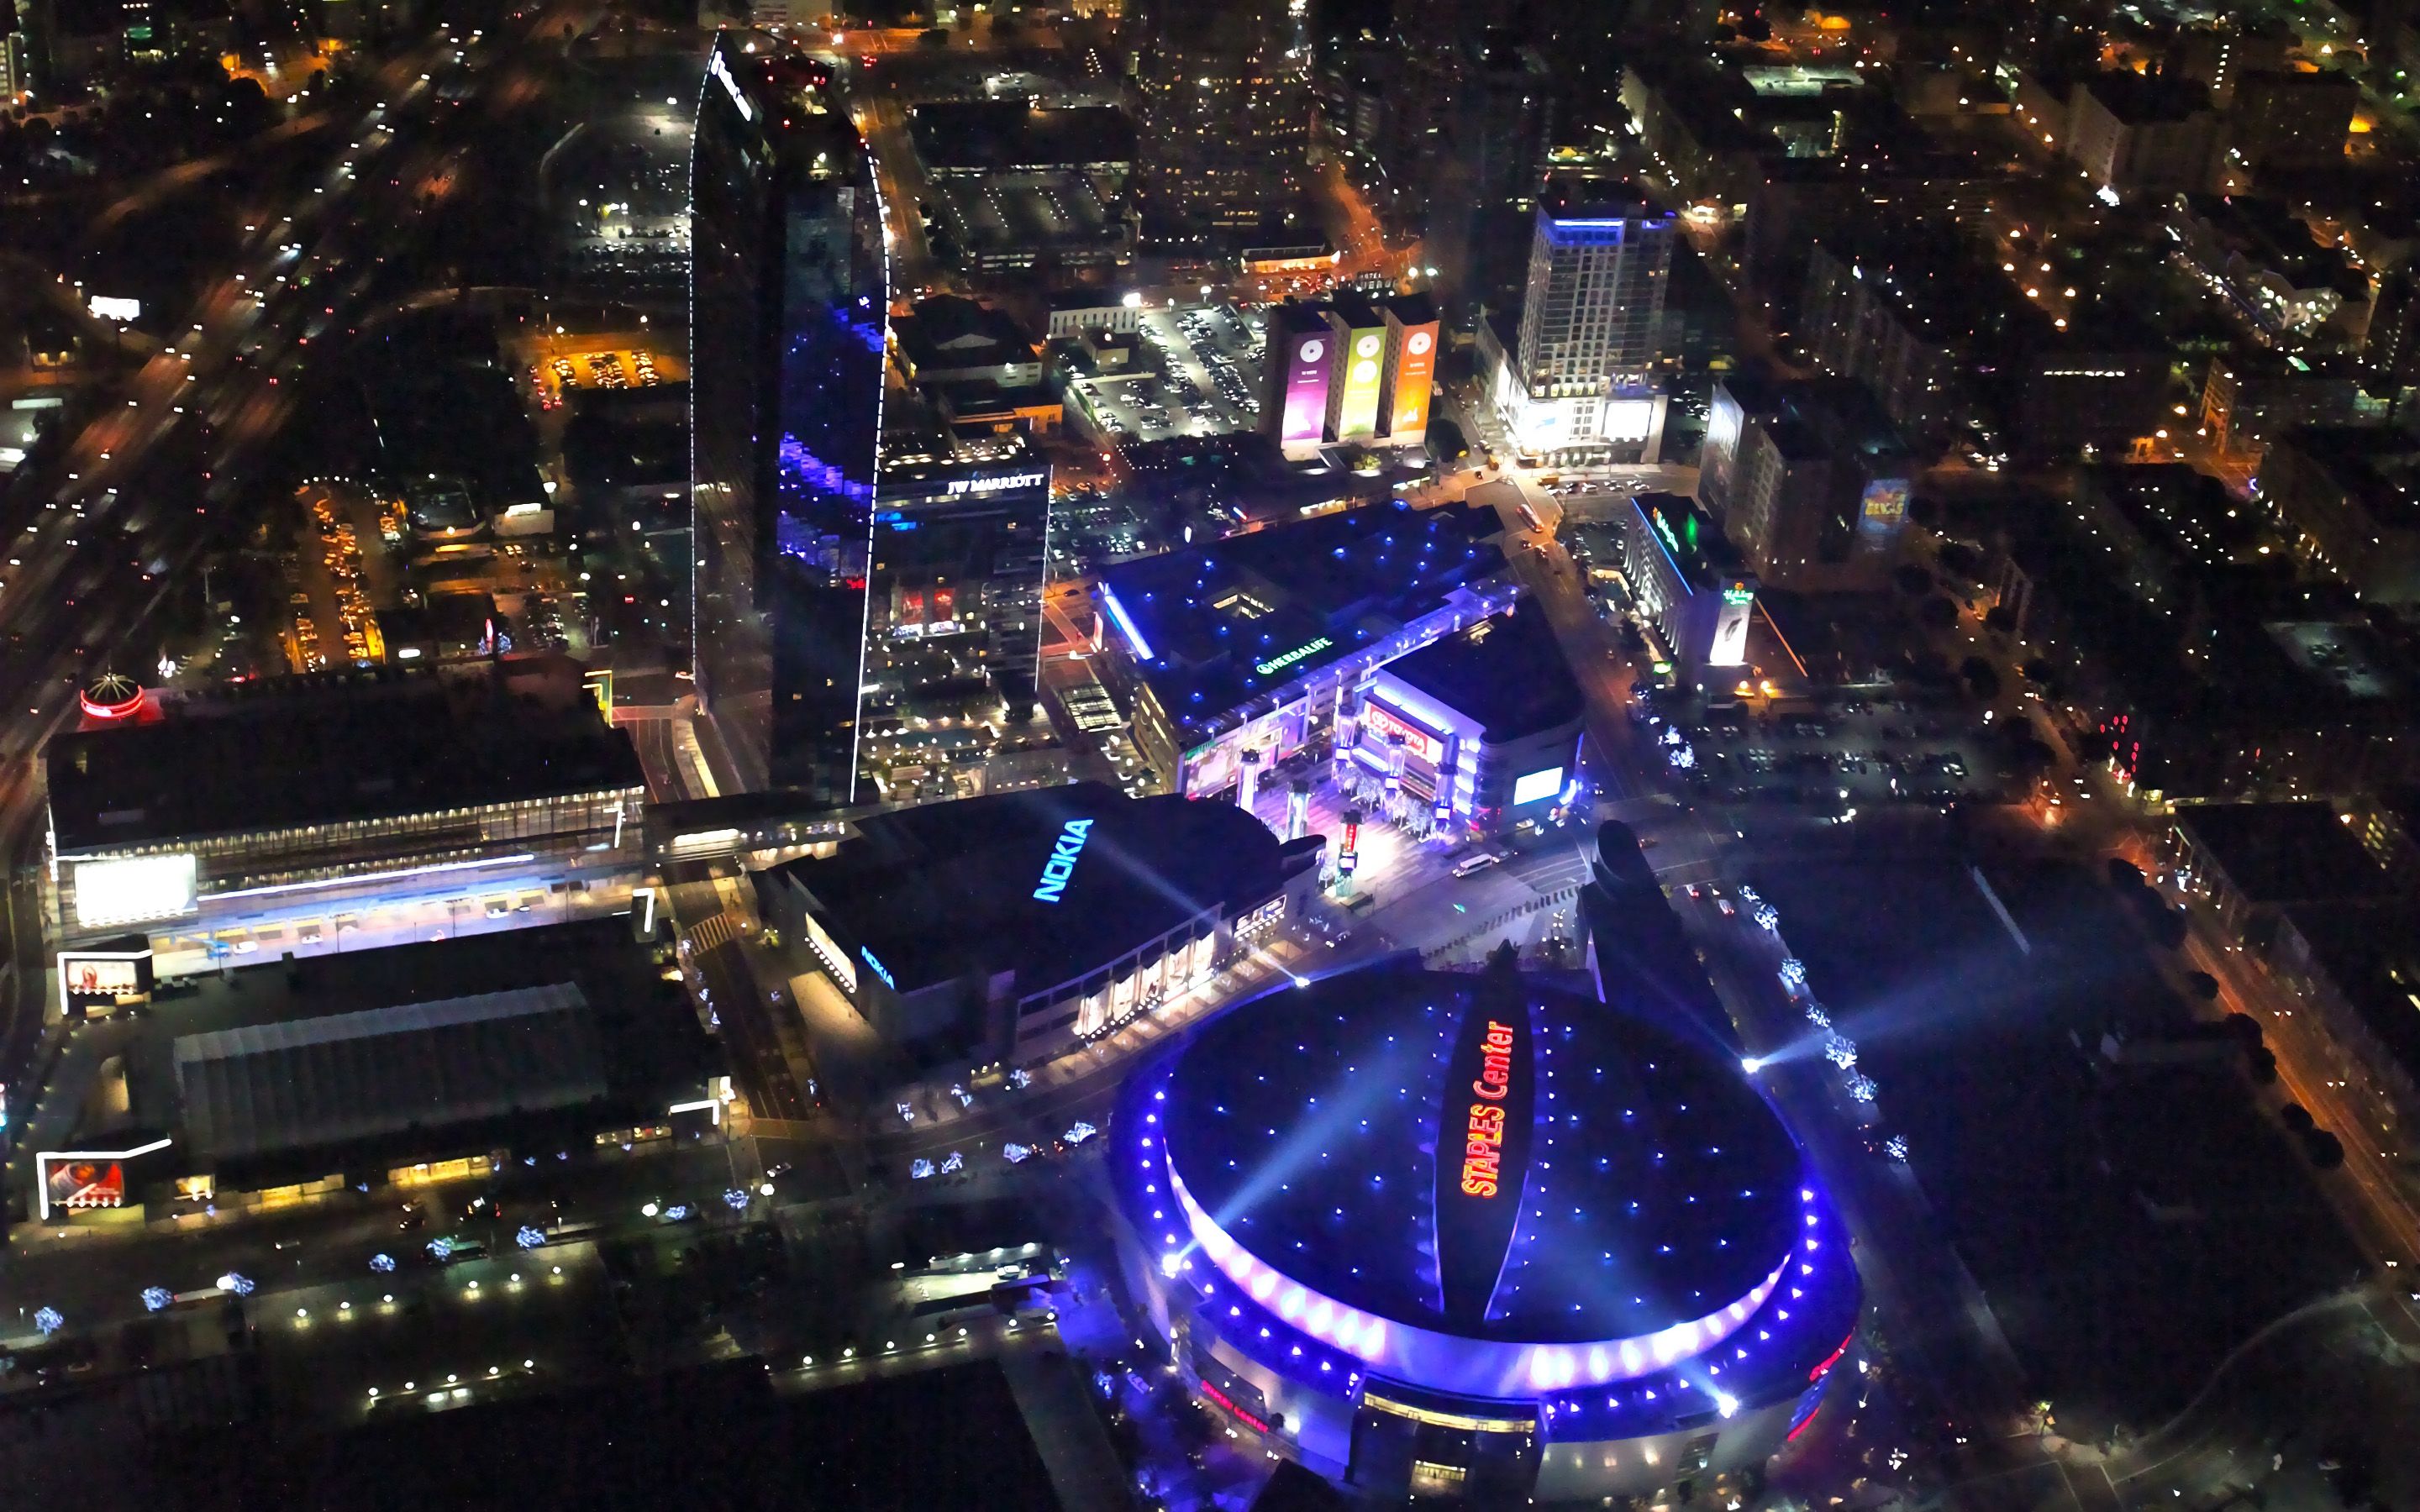 Download wallpaper Staples Center, night, aerial view, sports